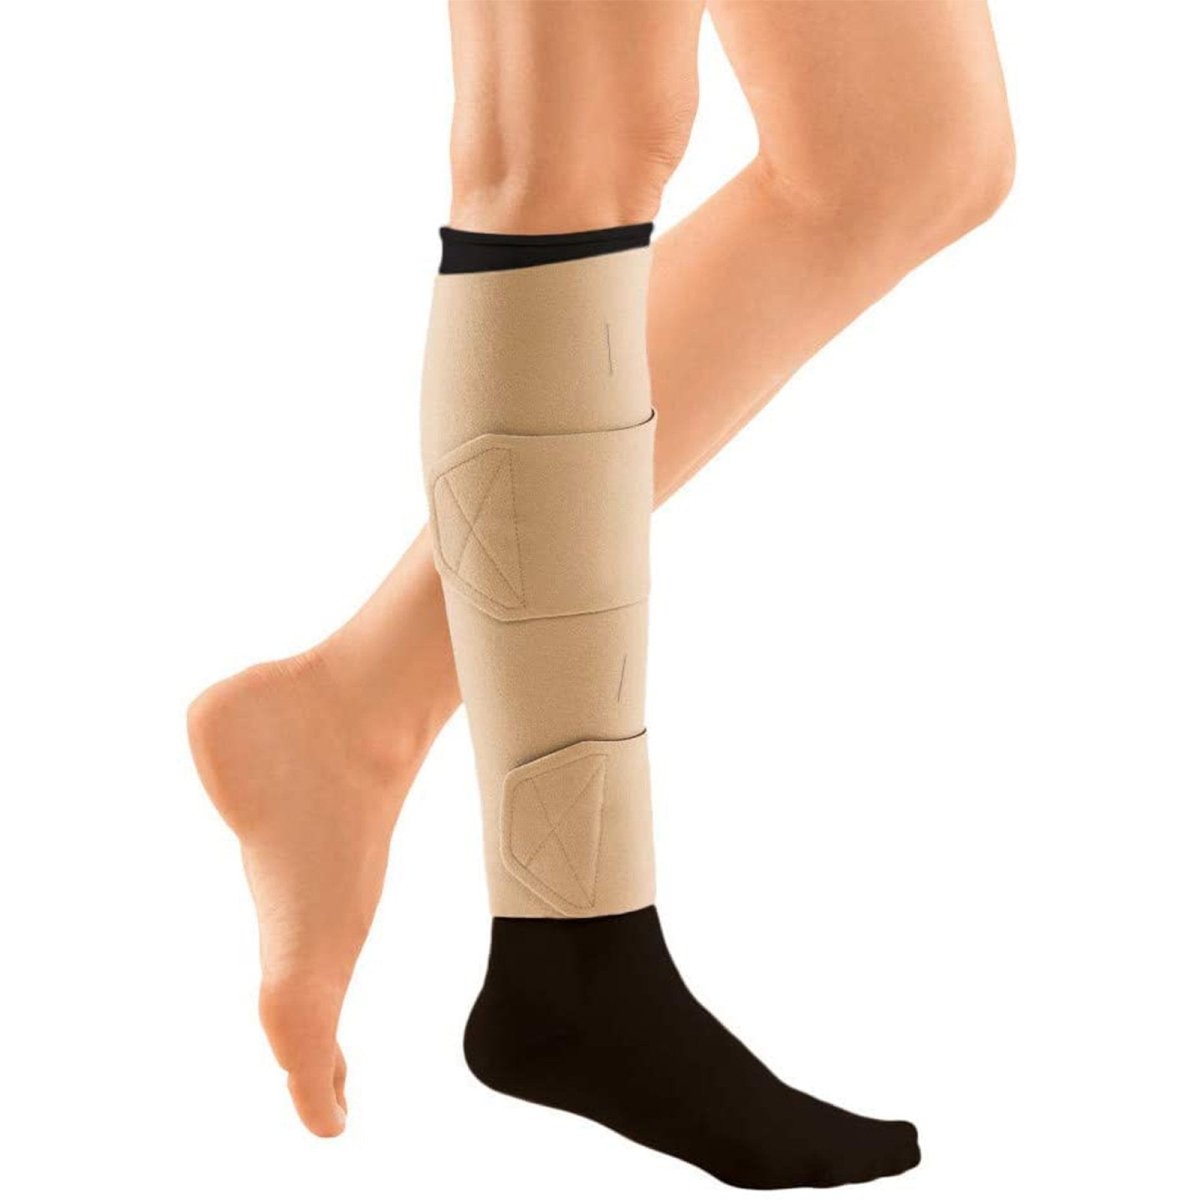 Compression T-Shirts - Lymphedema Stockings - Compression Garments